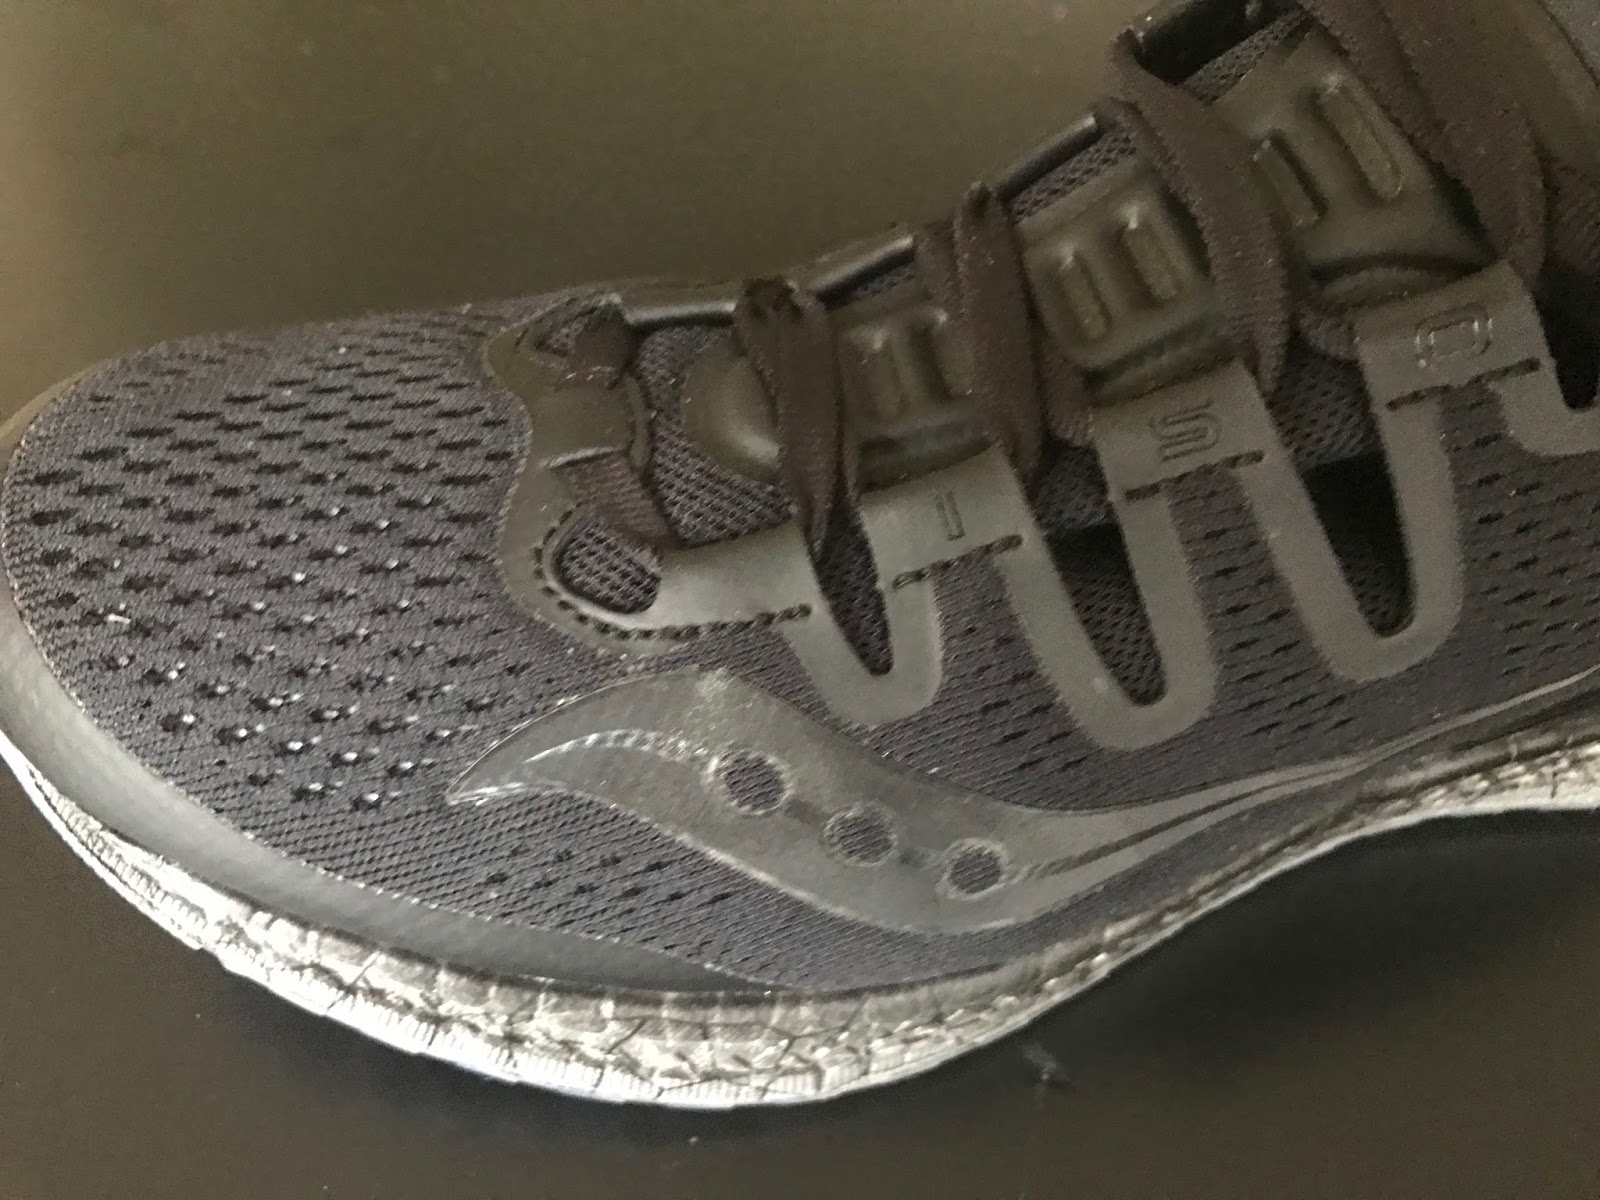 saucony freedom iso ls review